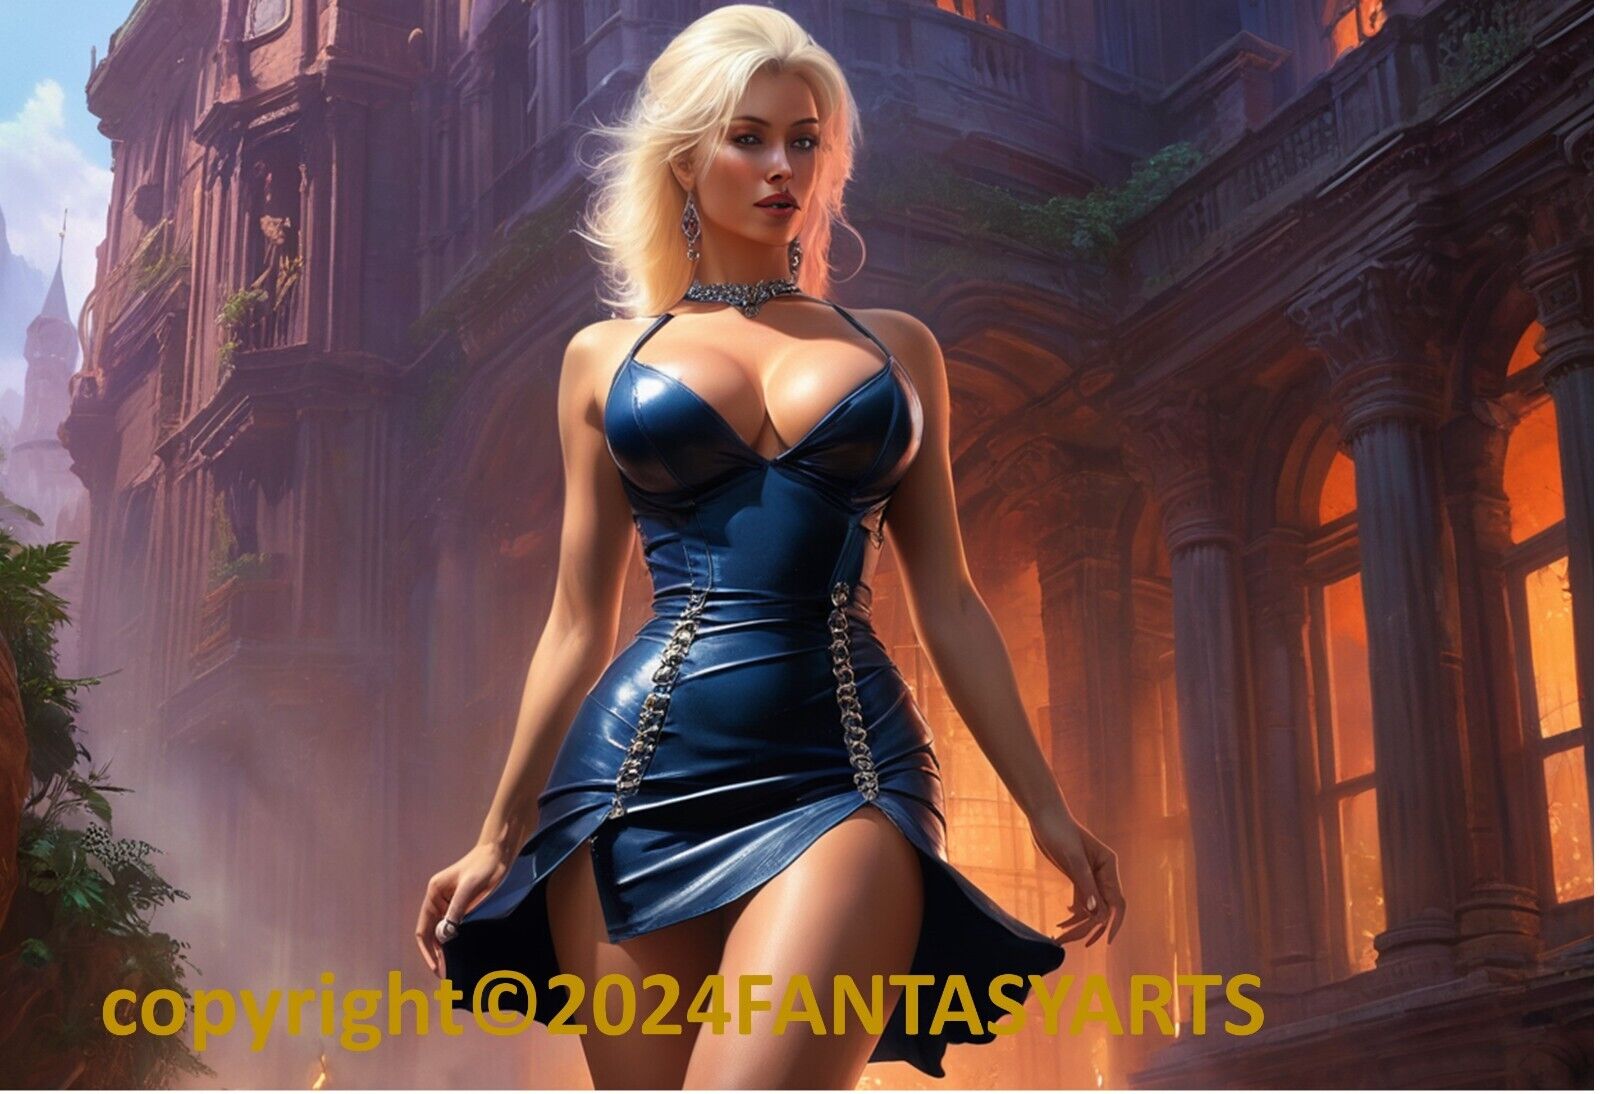 Beautiful Sexy Hot Blond Fantasy Girl C Glossy Large Poster Photo 11